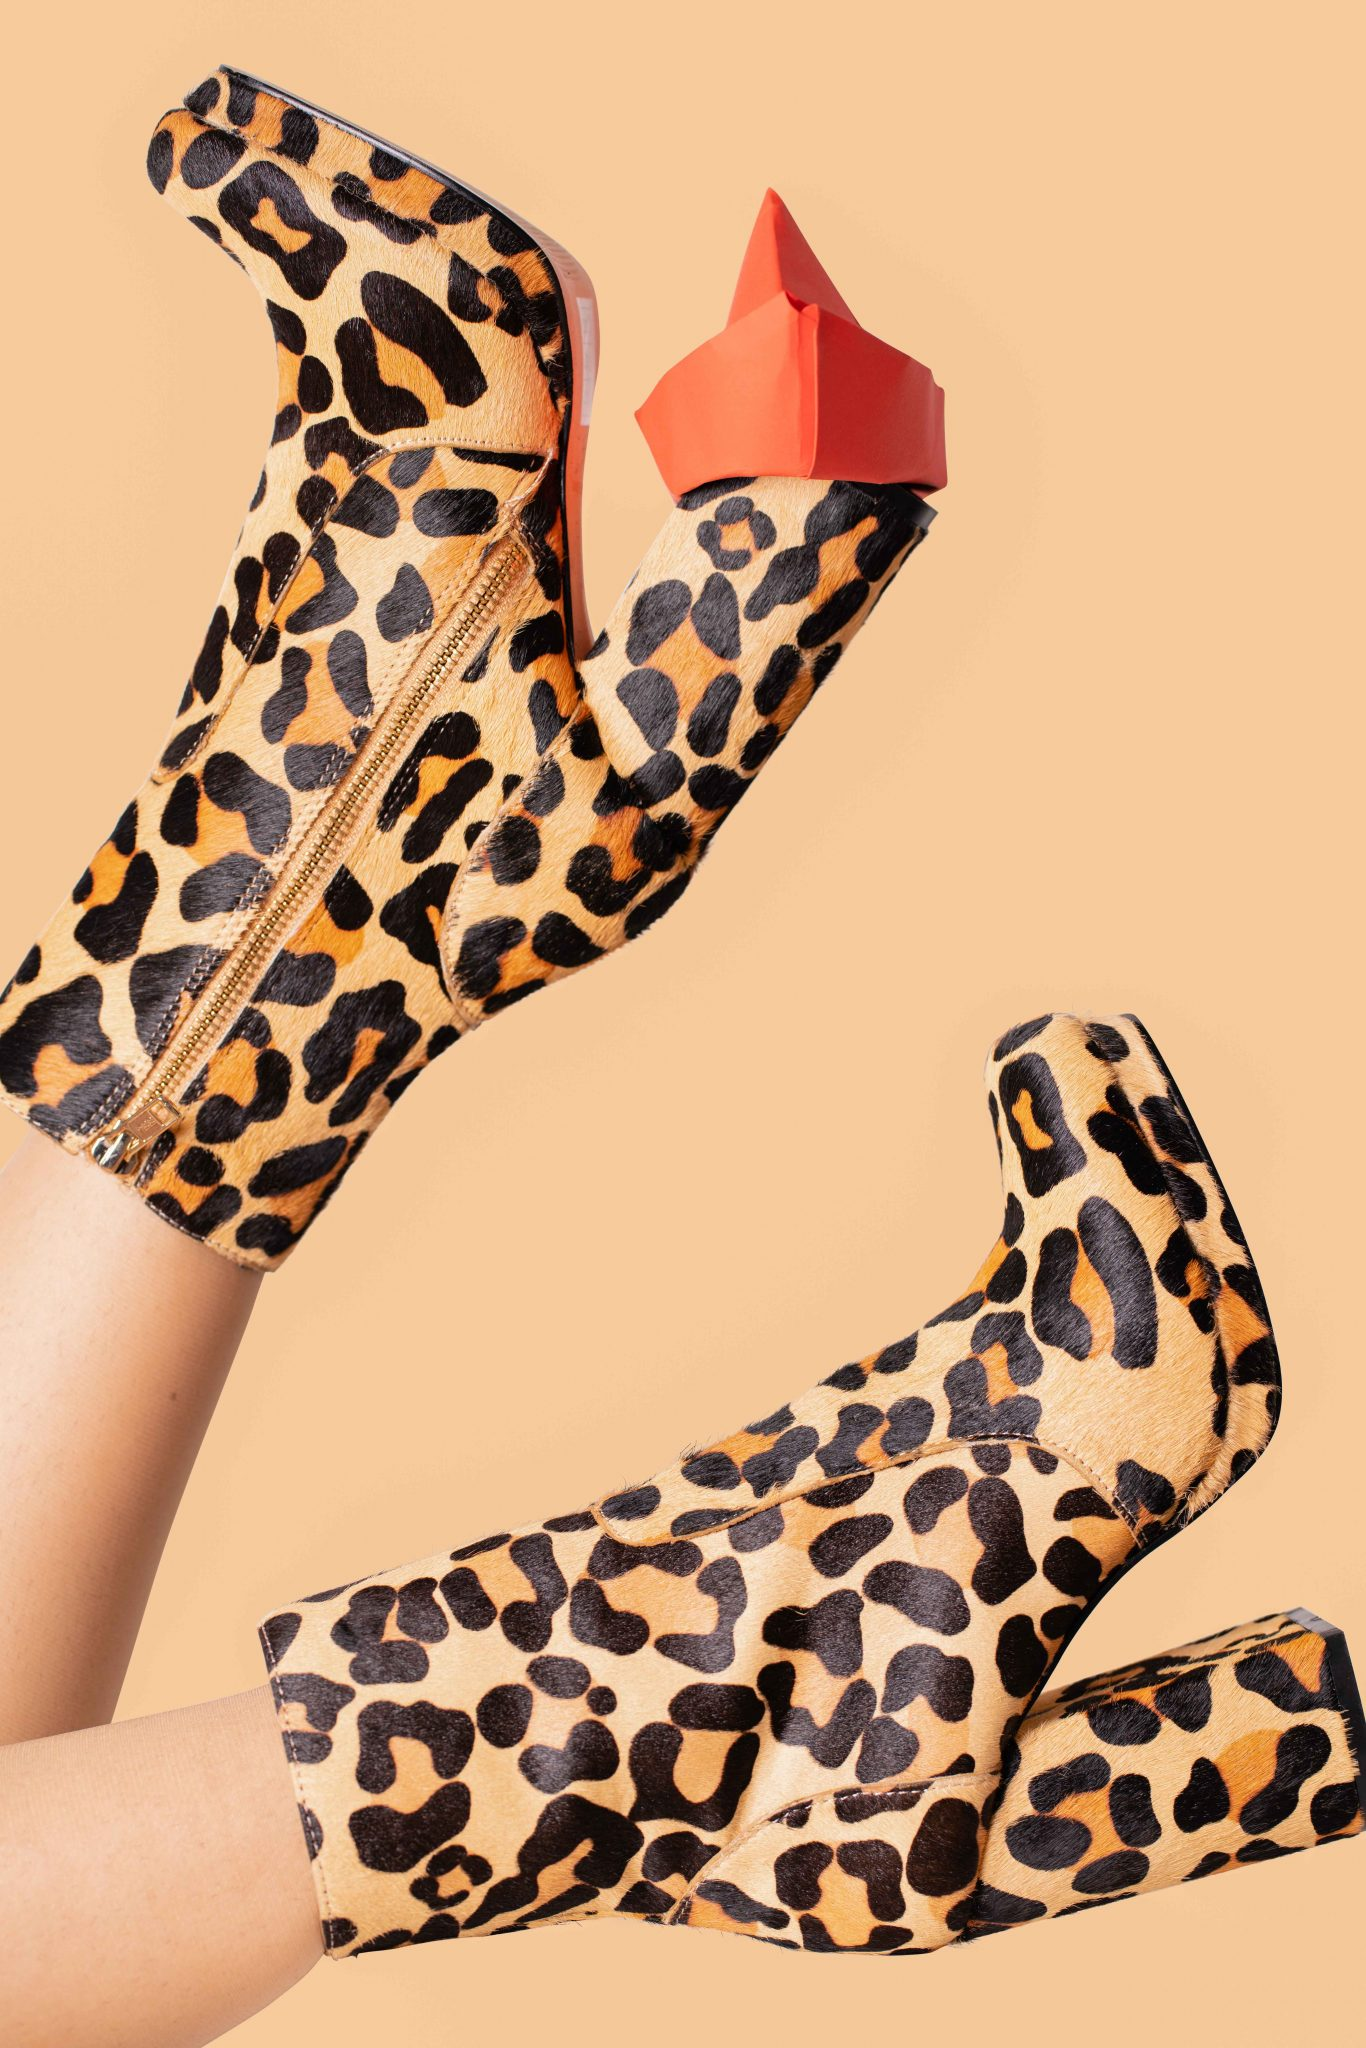 Commercial photo of leopard print boots